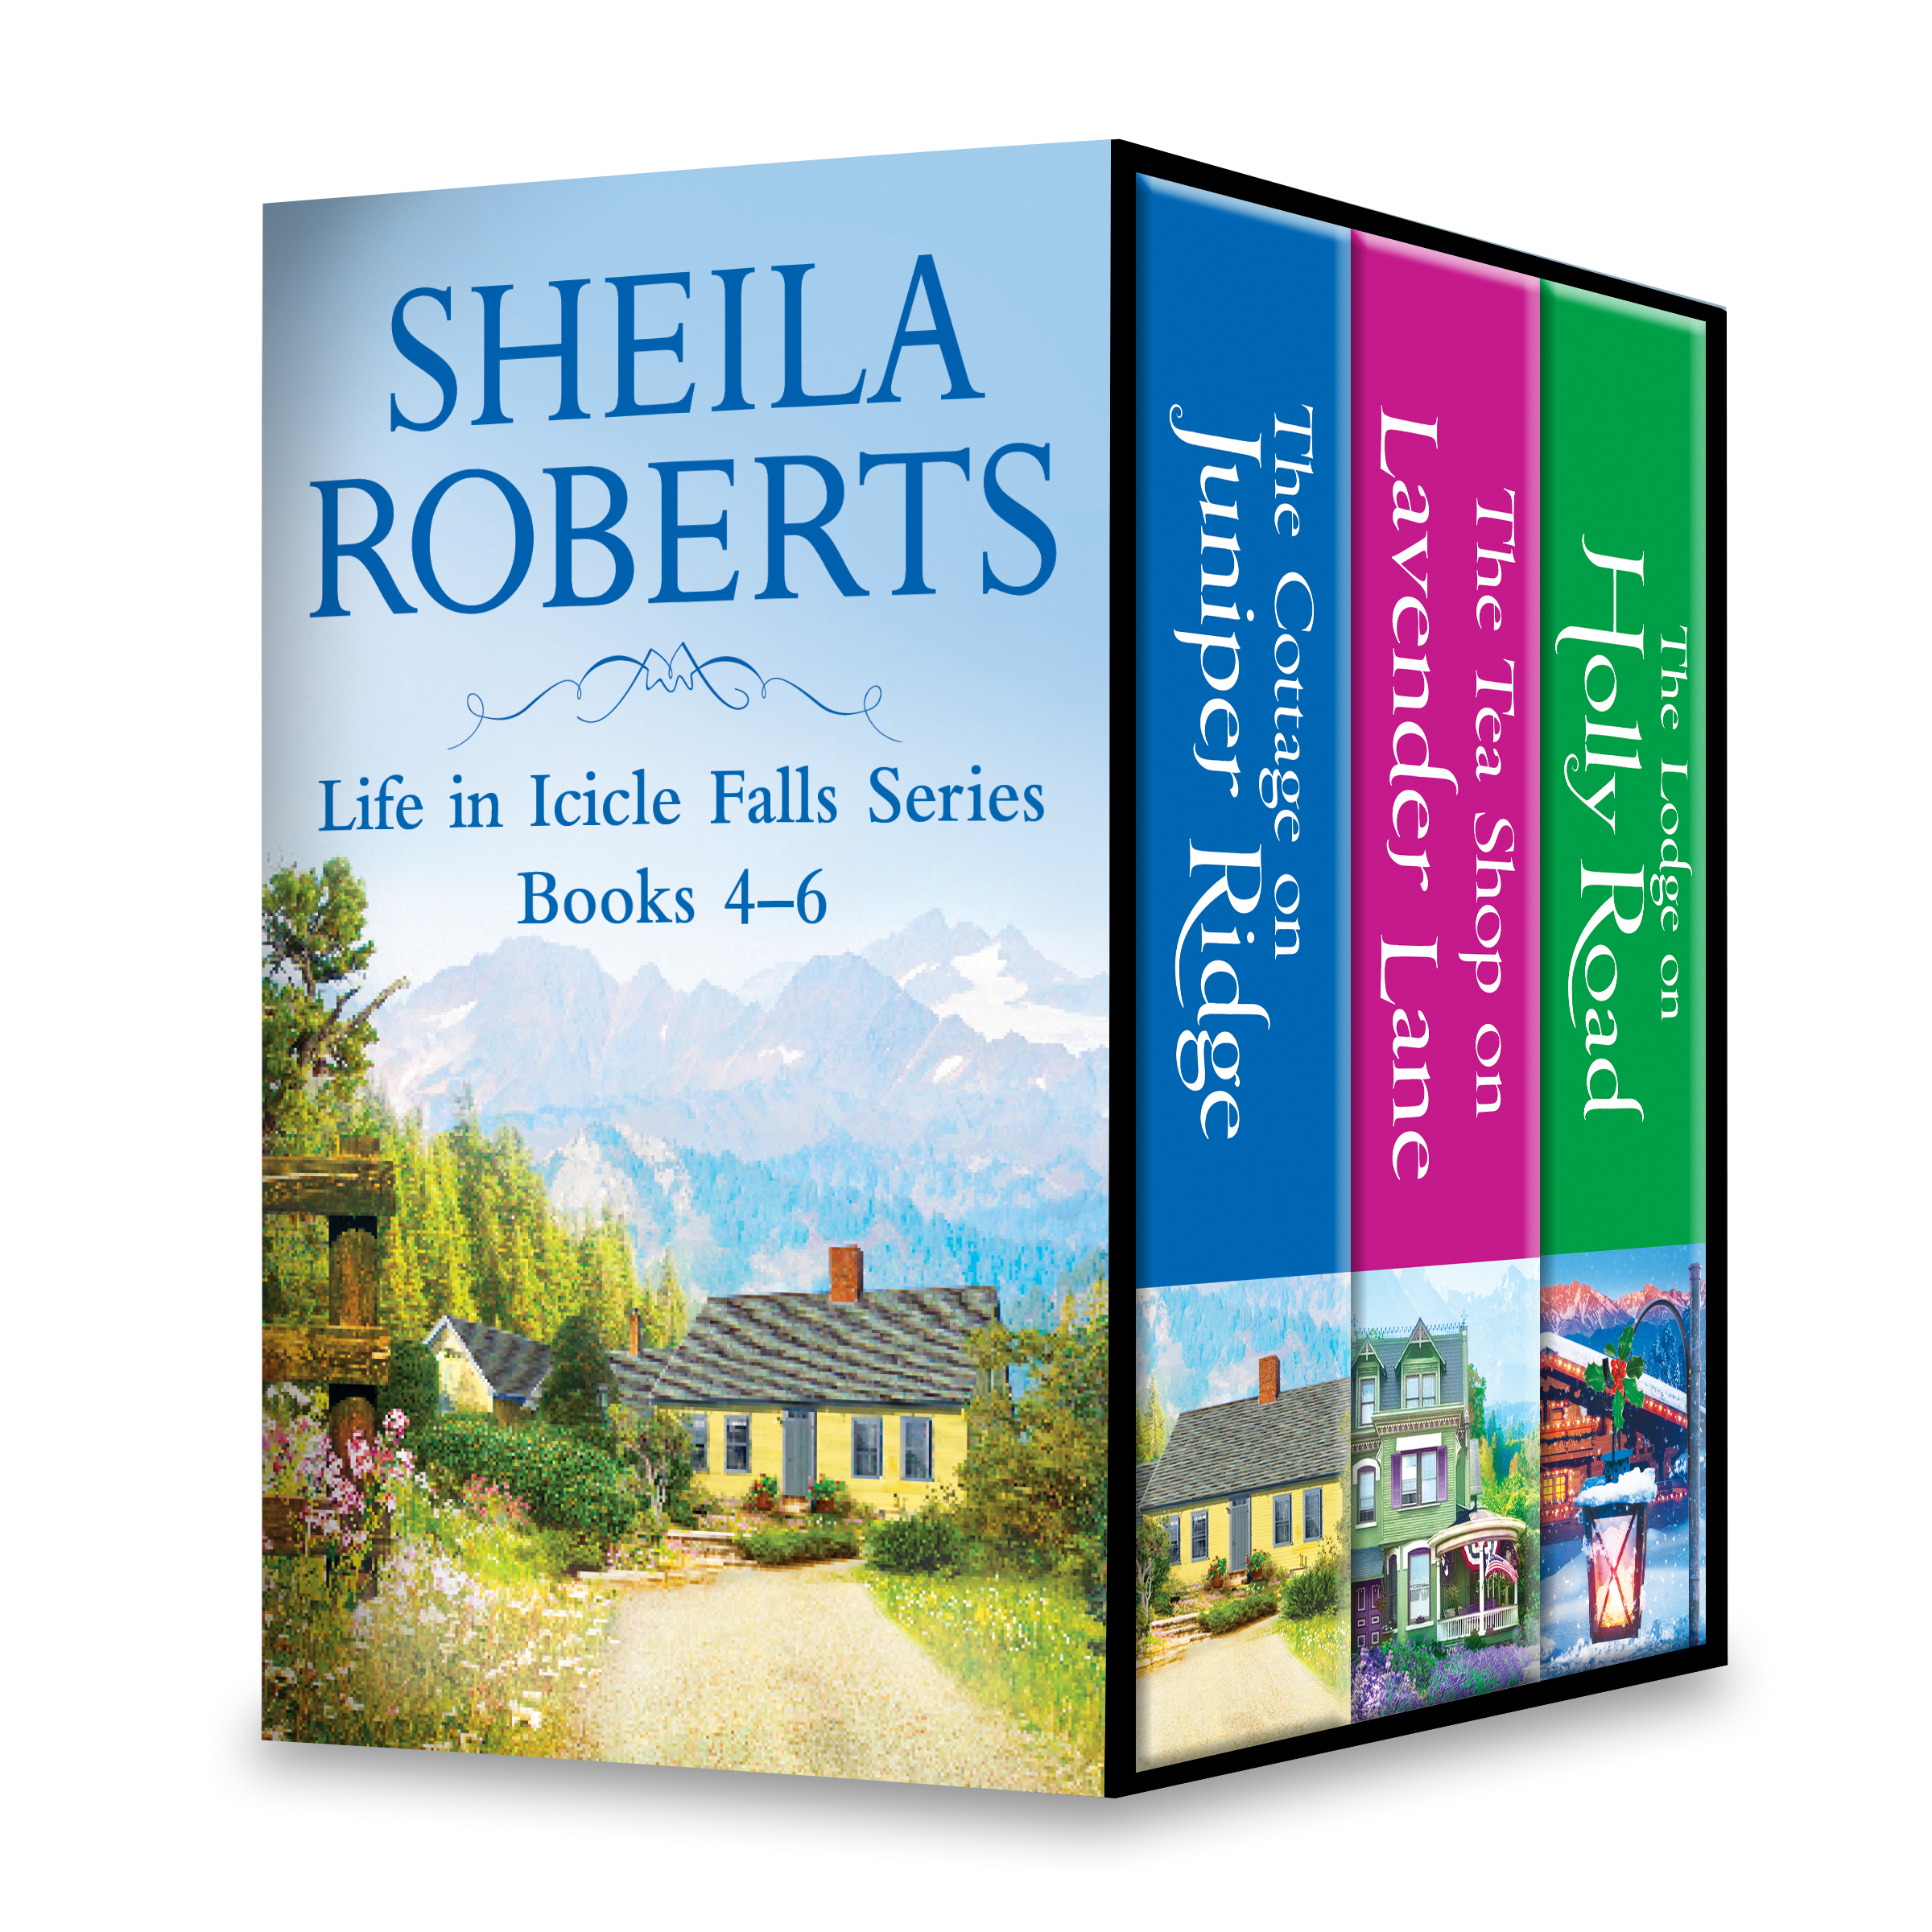 Umschlagbild für Sheila Roberts Life in Icicle Falls Series Books 4-6 [electronic resource] : An Anthology